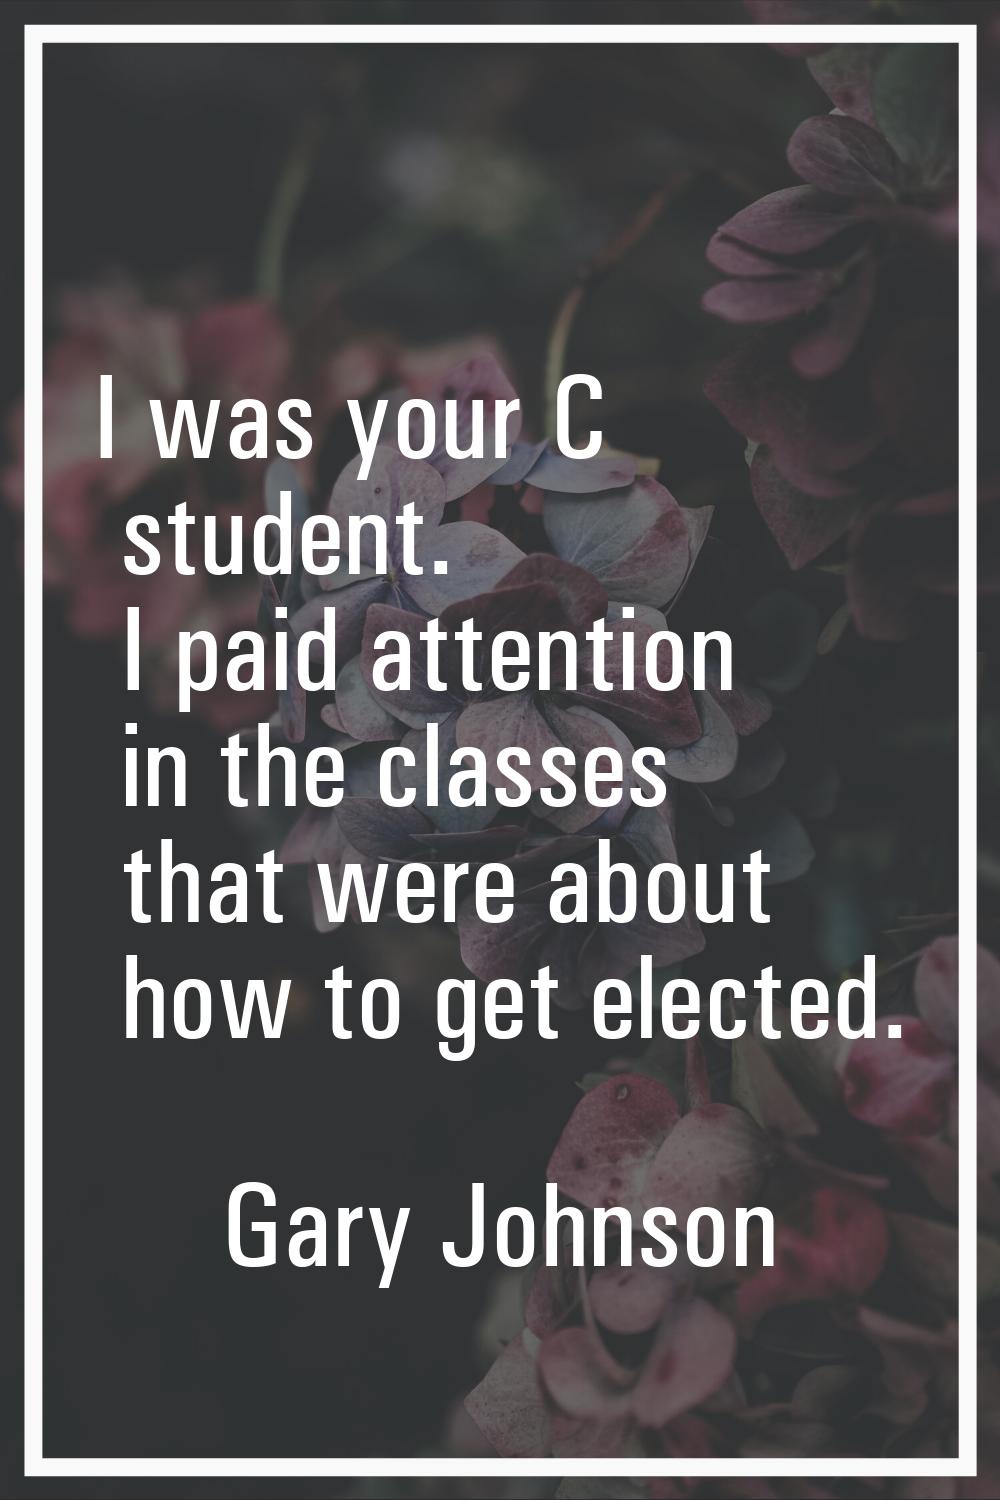 I was your C student. I paid attention in the classes that were about how to get elected.